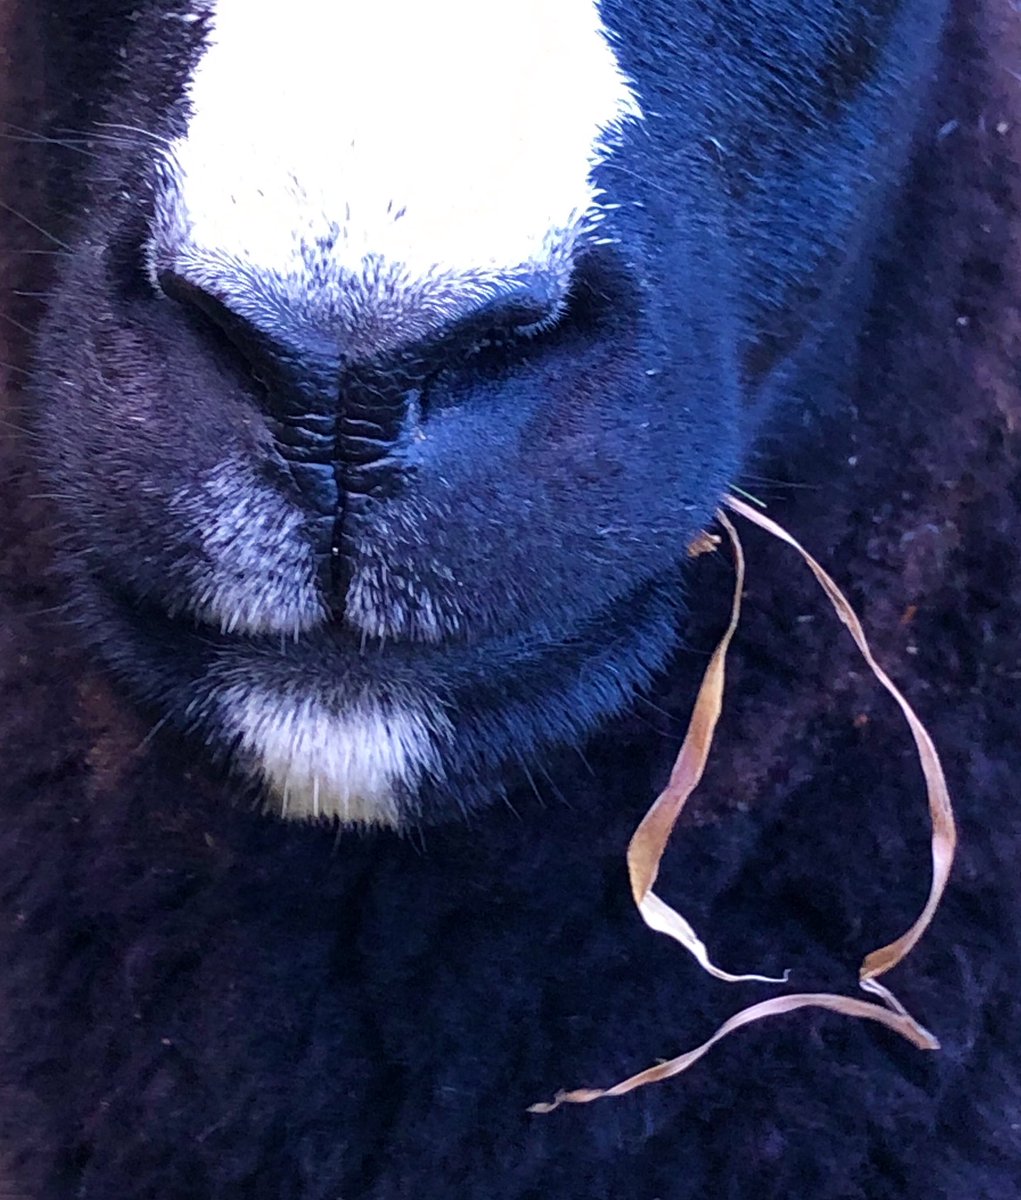 Yes and another zwartbles sheep nose this time with dried grass.